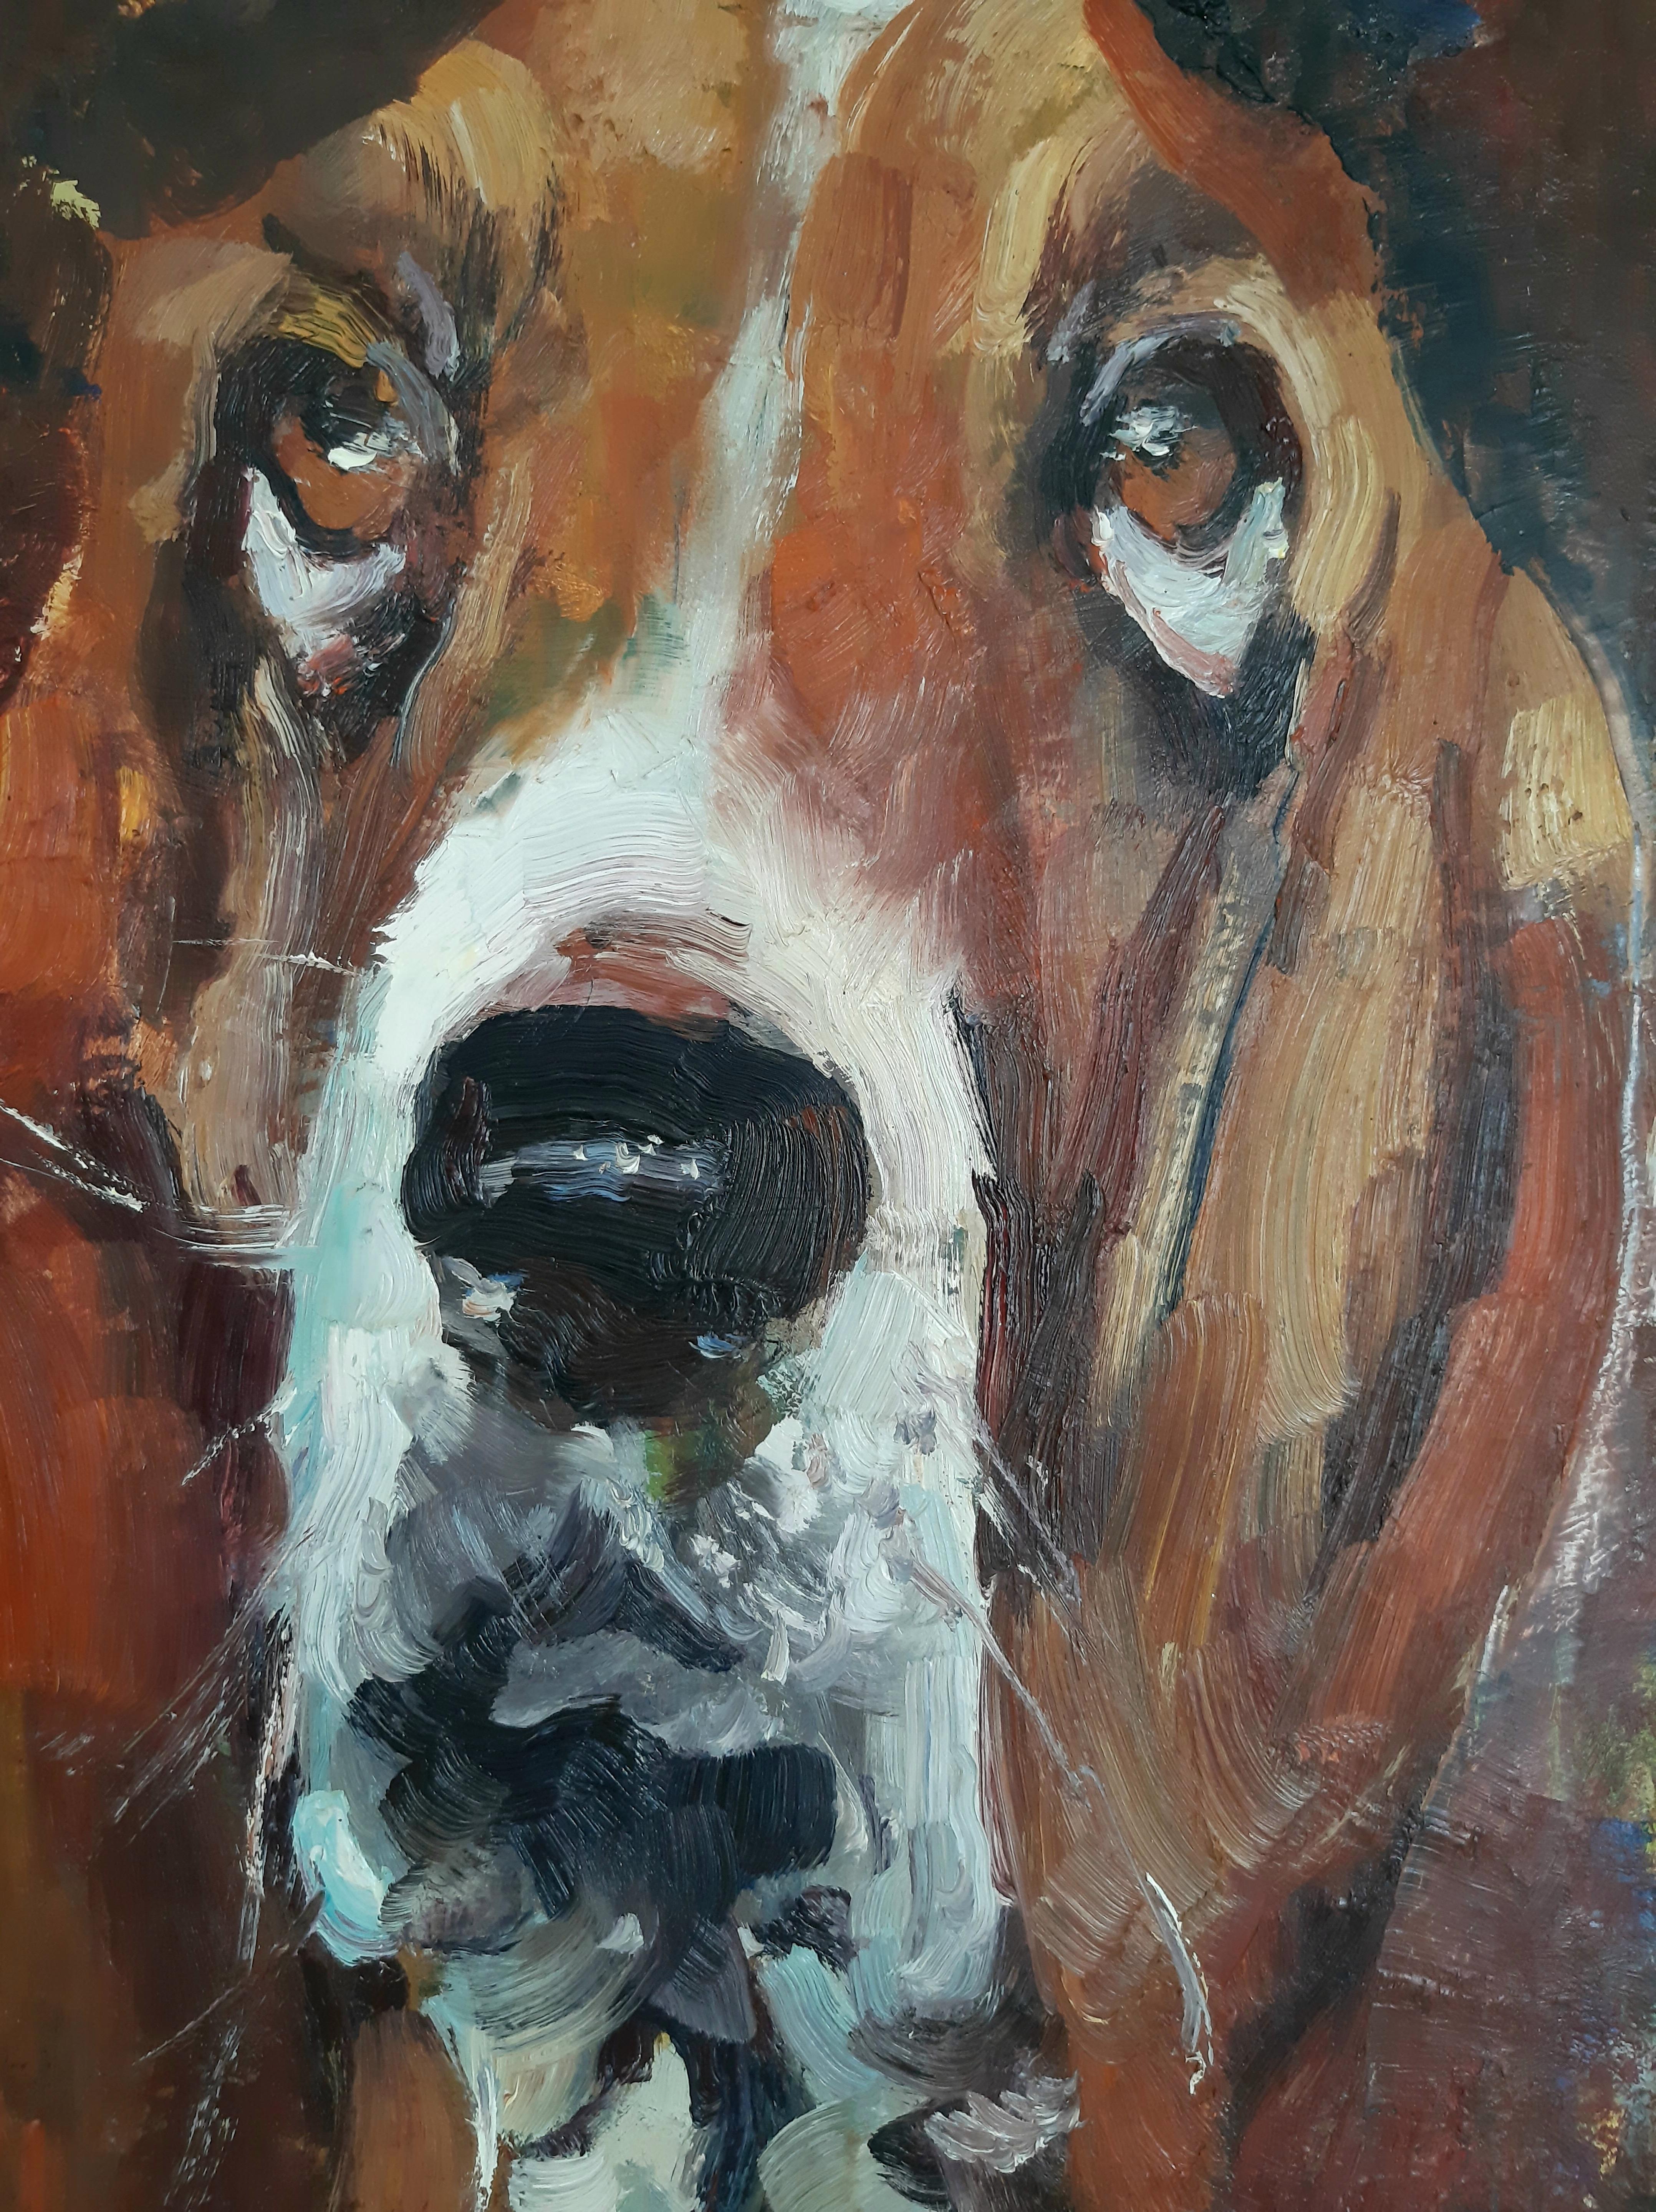 In this oil painting, a portrait of a Basset Hound stands before us, its gaze directed straight at us. Embedded within this gaze is a silent question, as if the dog wishes to convey something of importance to us. The dog's eyes radiate tranquility,